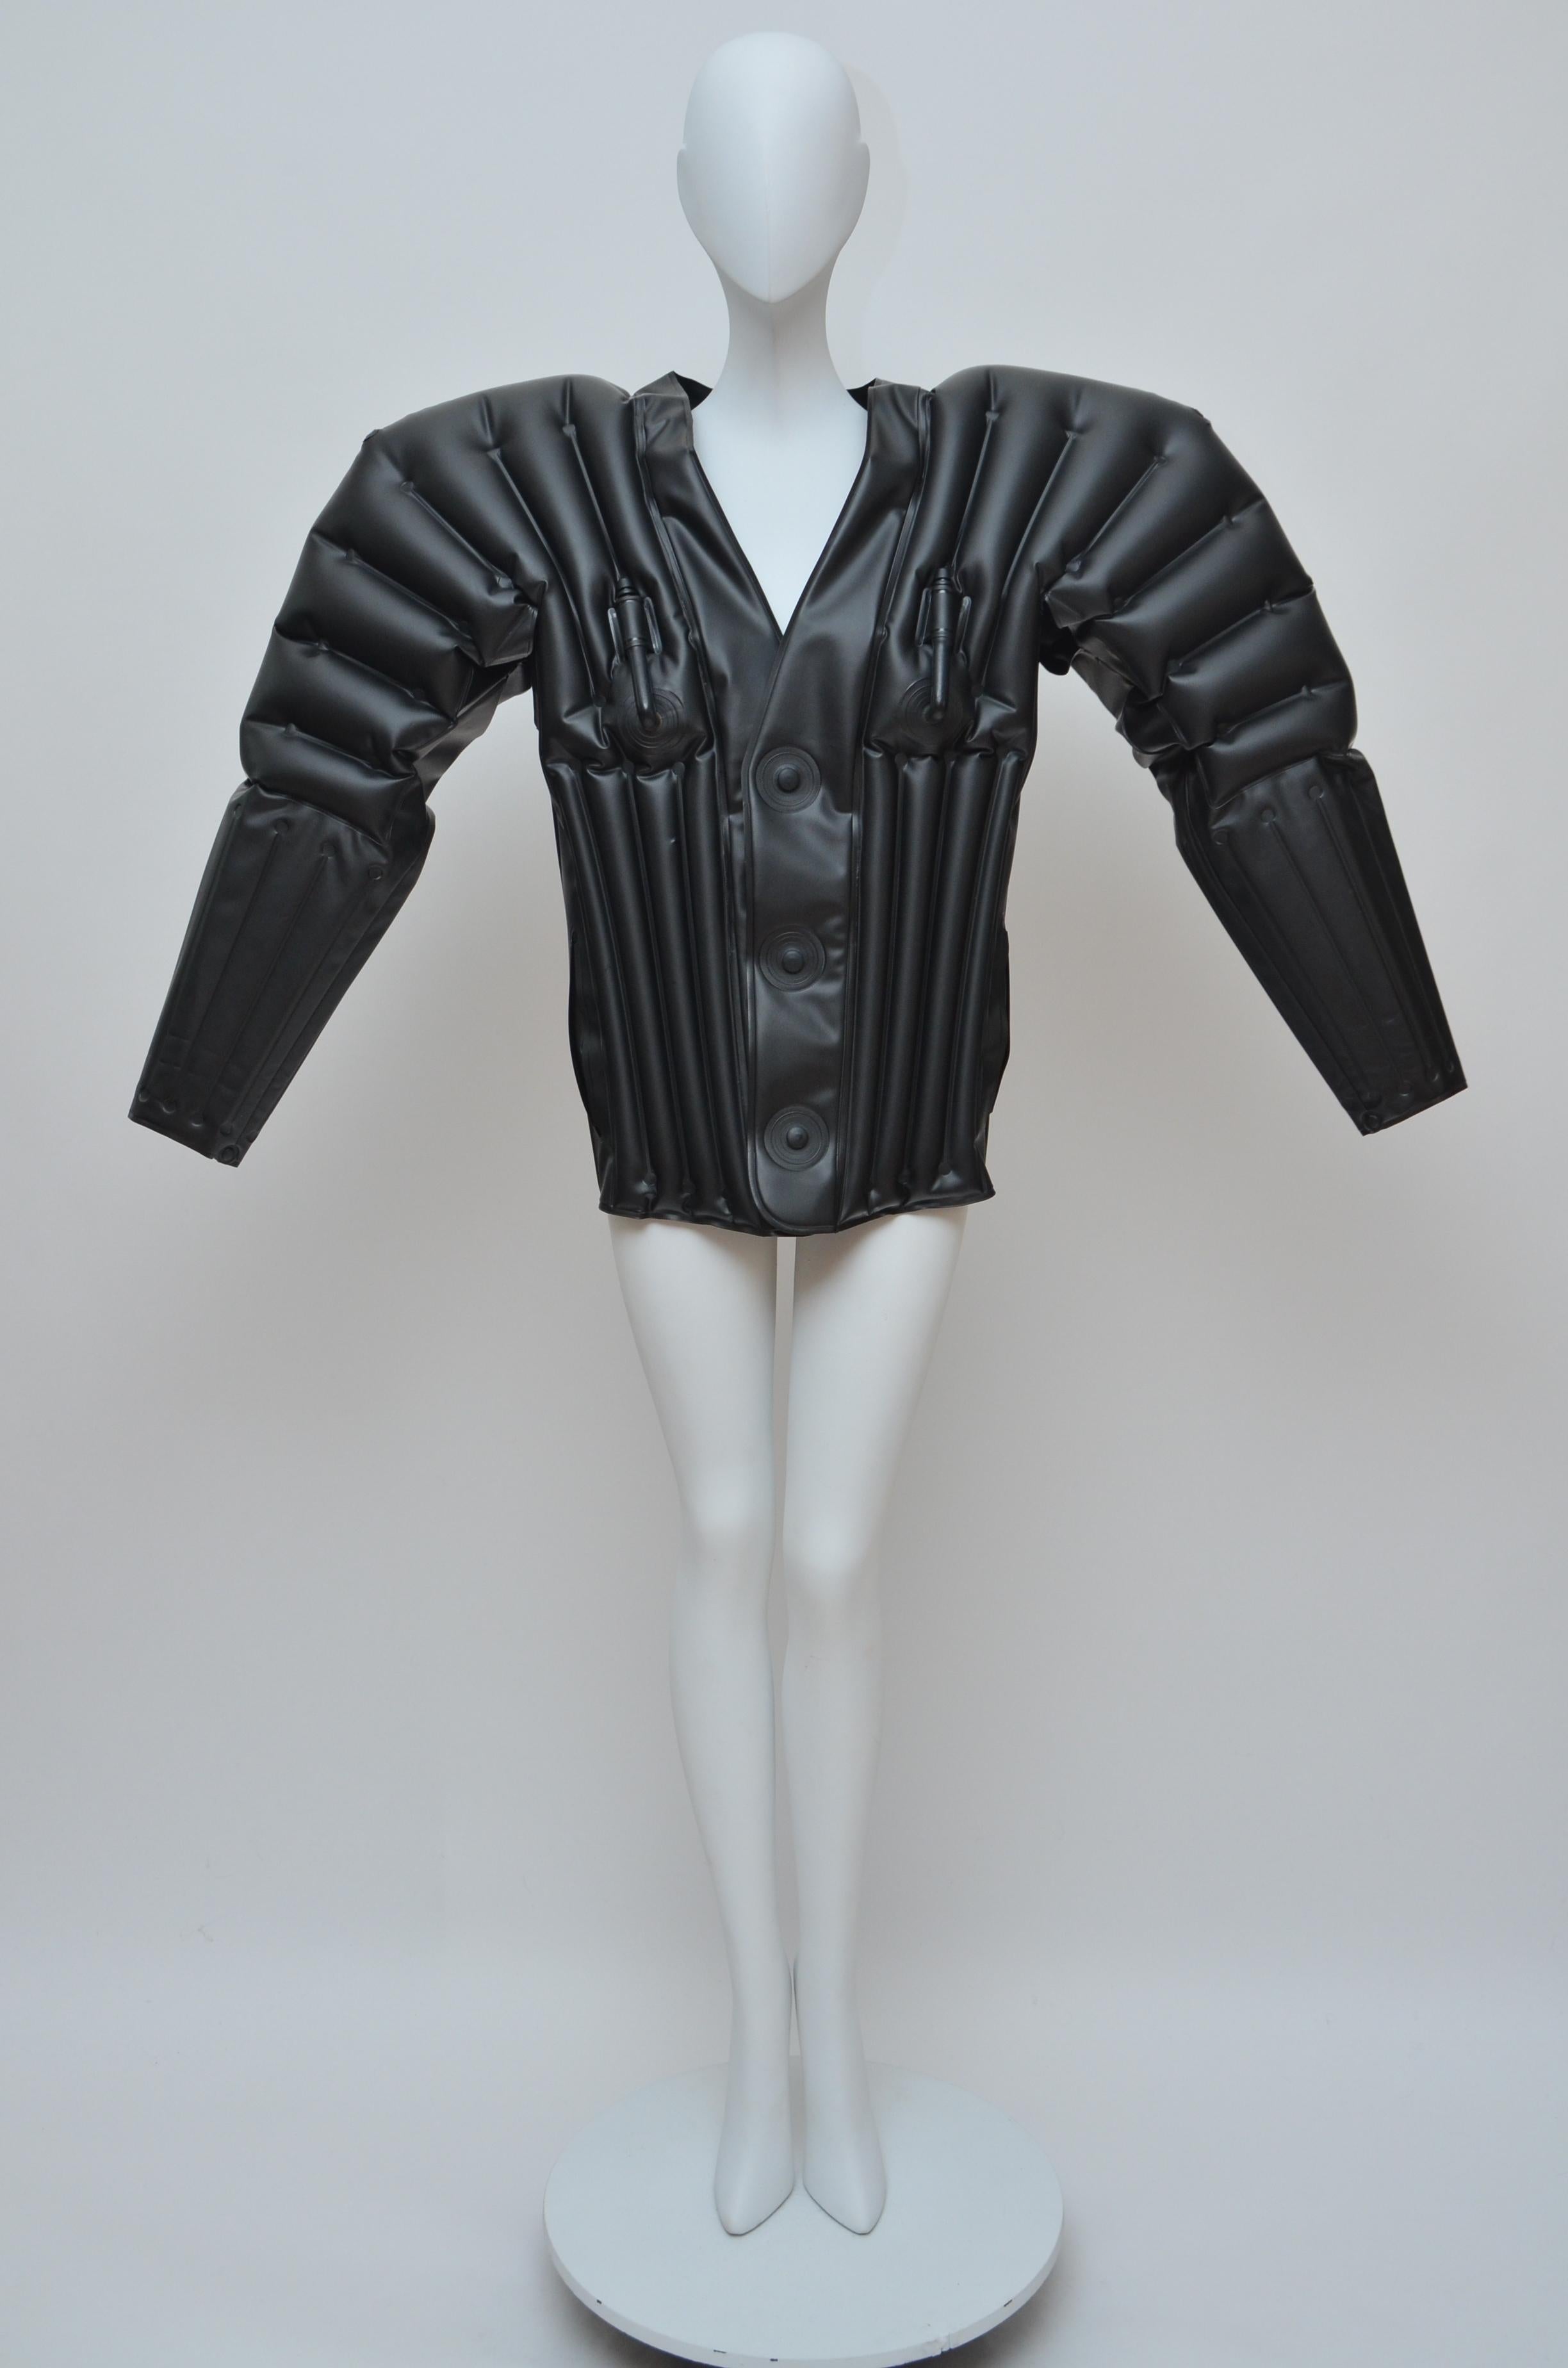 Incredible rare  Issey Miyake man's inflatable rubber jacket, 1987.
Two inflater tubes on the chest so booth sides are inflated separate.
Large press stud fasteners in the front.Lining moulded 